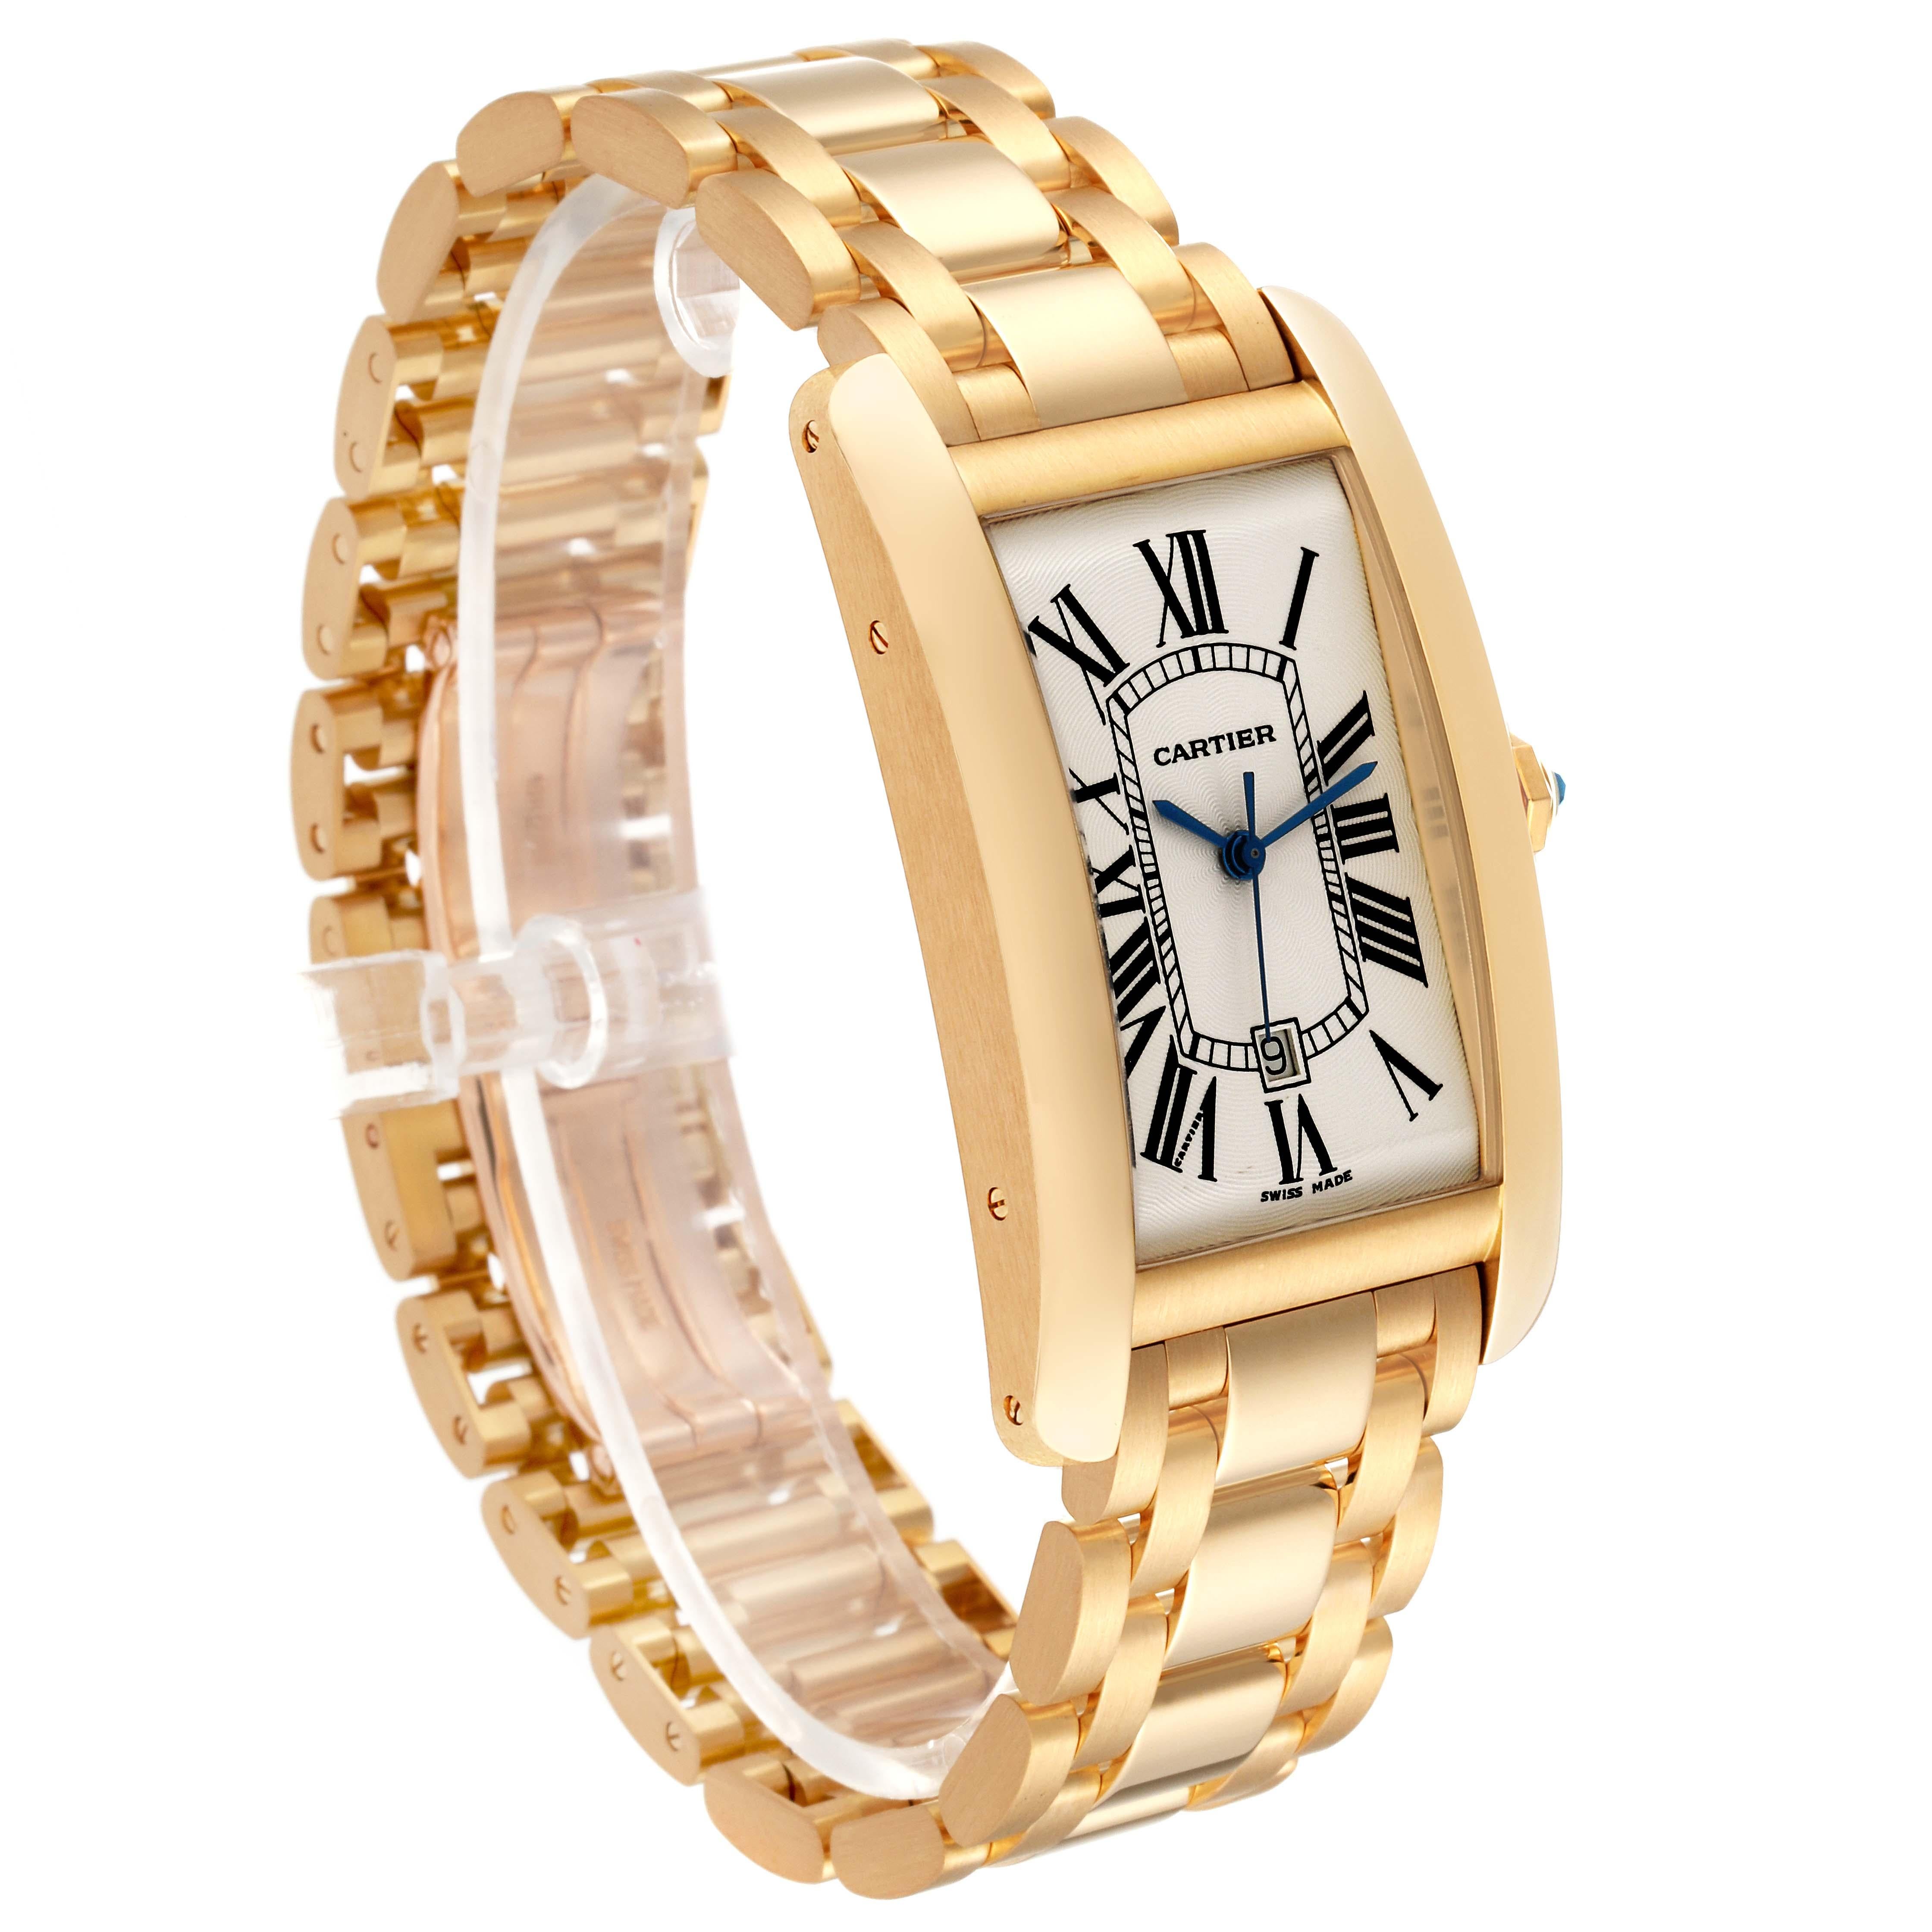 Cartier Tank Americaine Yellow Gold Automatic Mens Watch W26054K2 For Sale 4